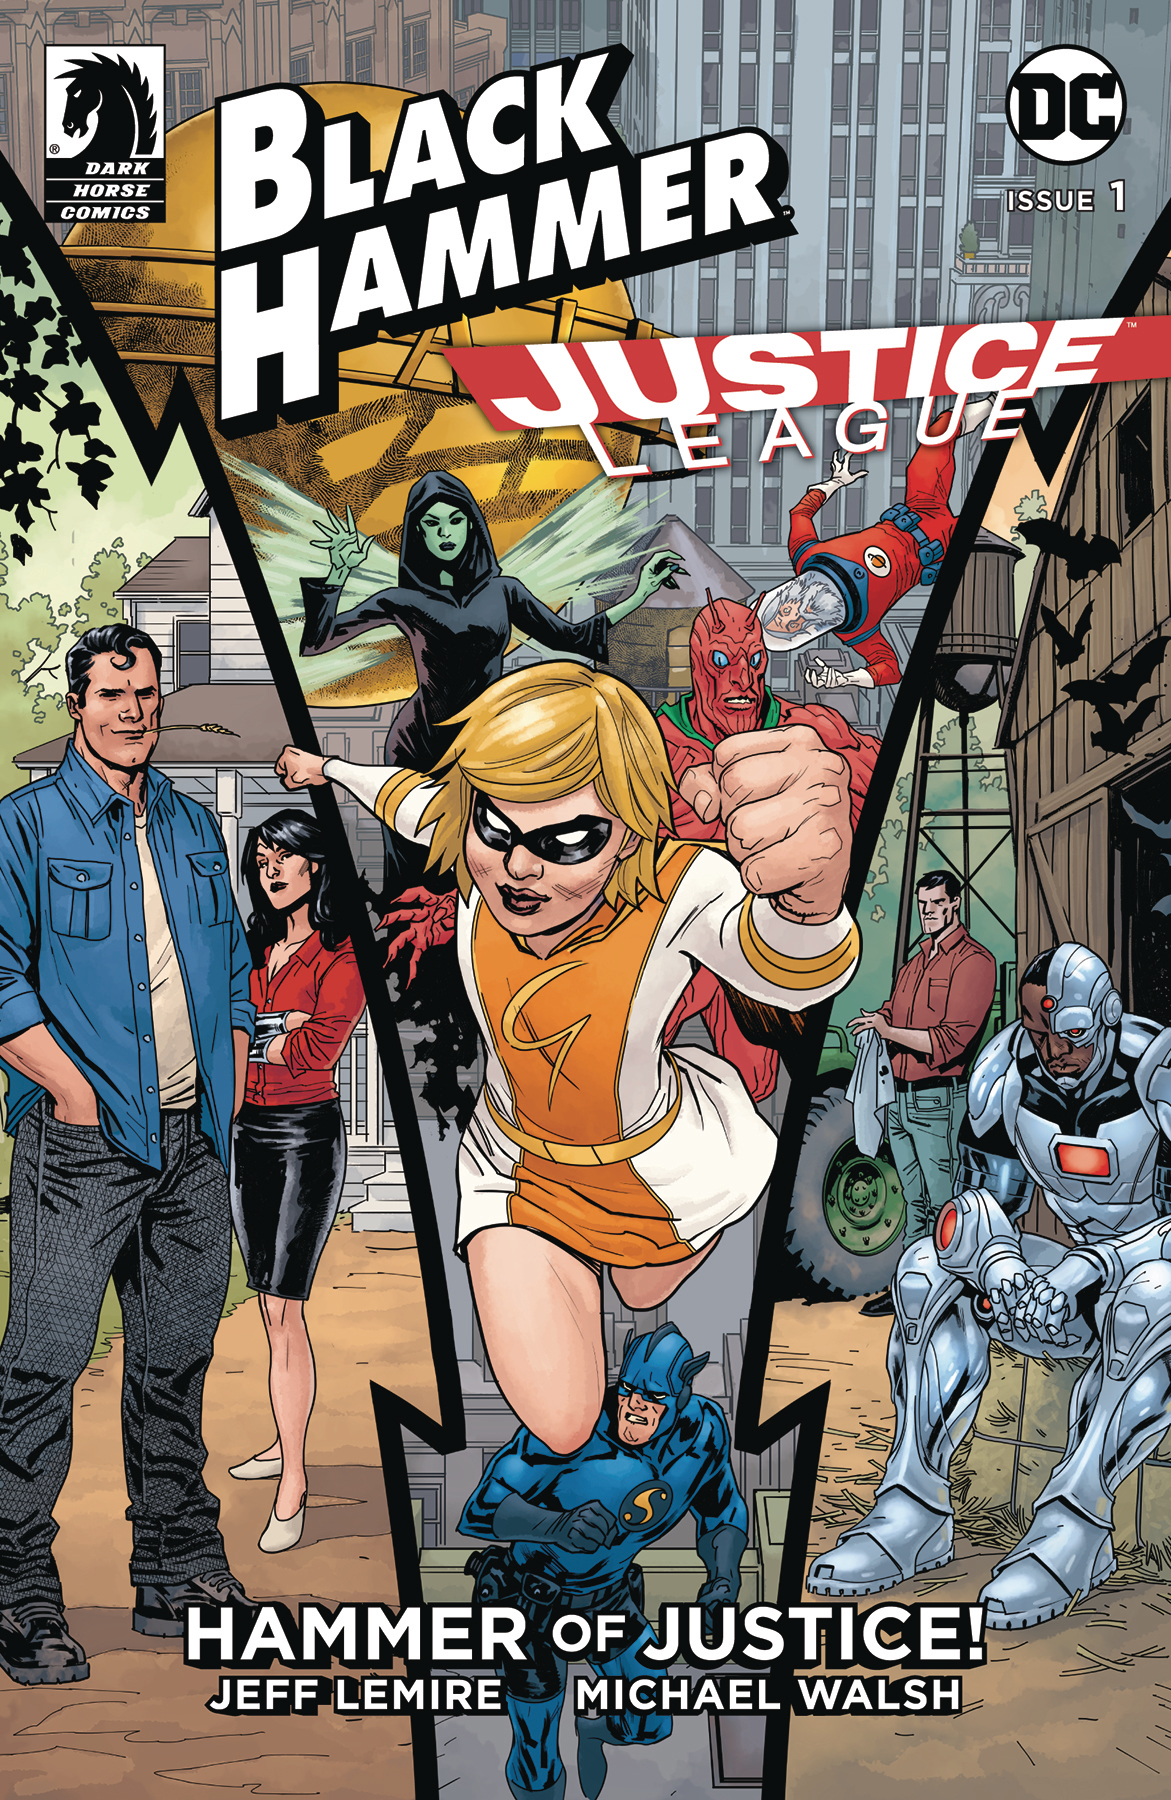 Black Hammer Justice League no. 1 (Paquette Variant) (1 of 5) (2019 Series)